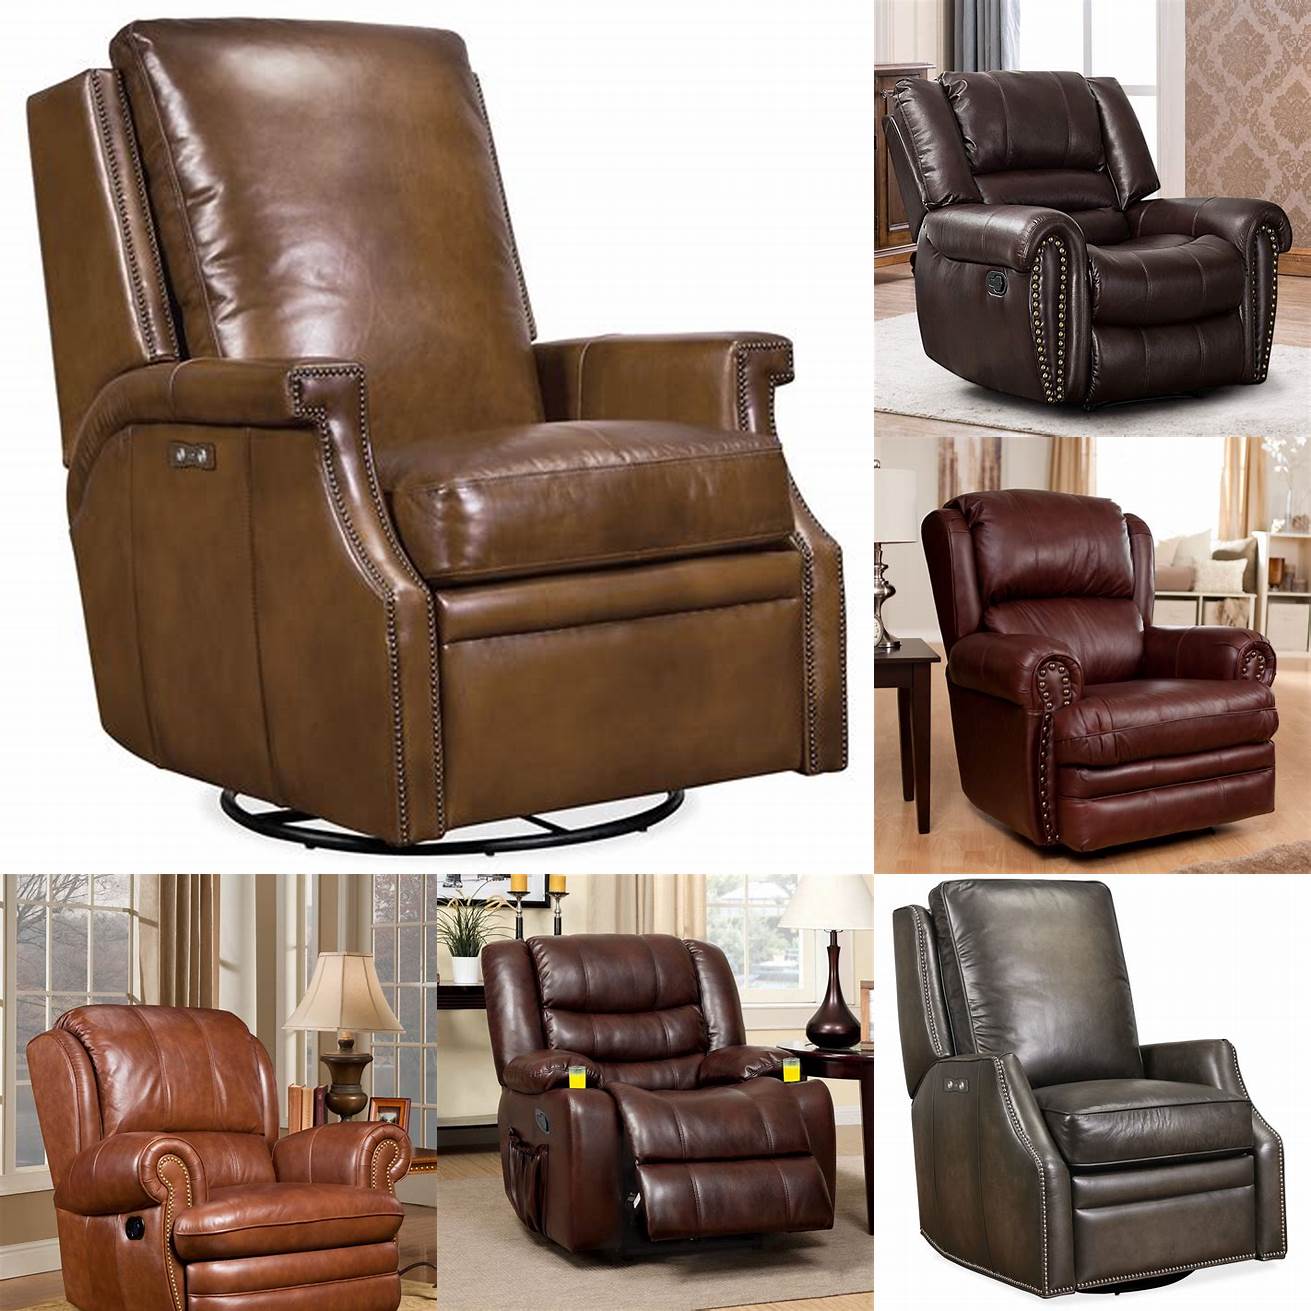 Recliner in a leather upholstery